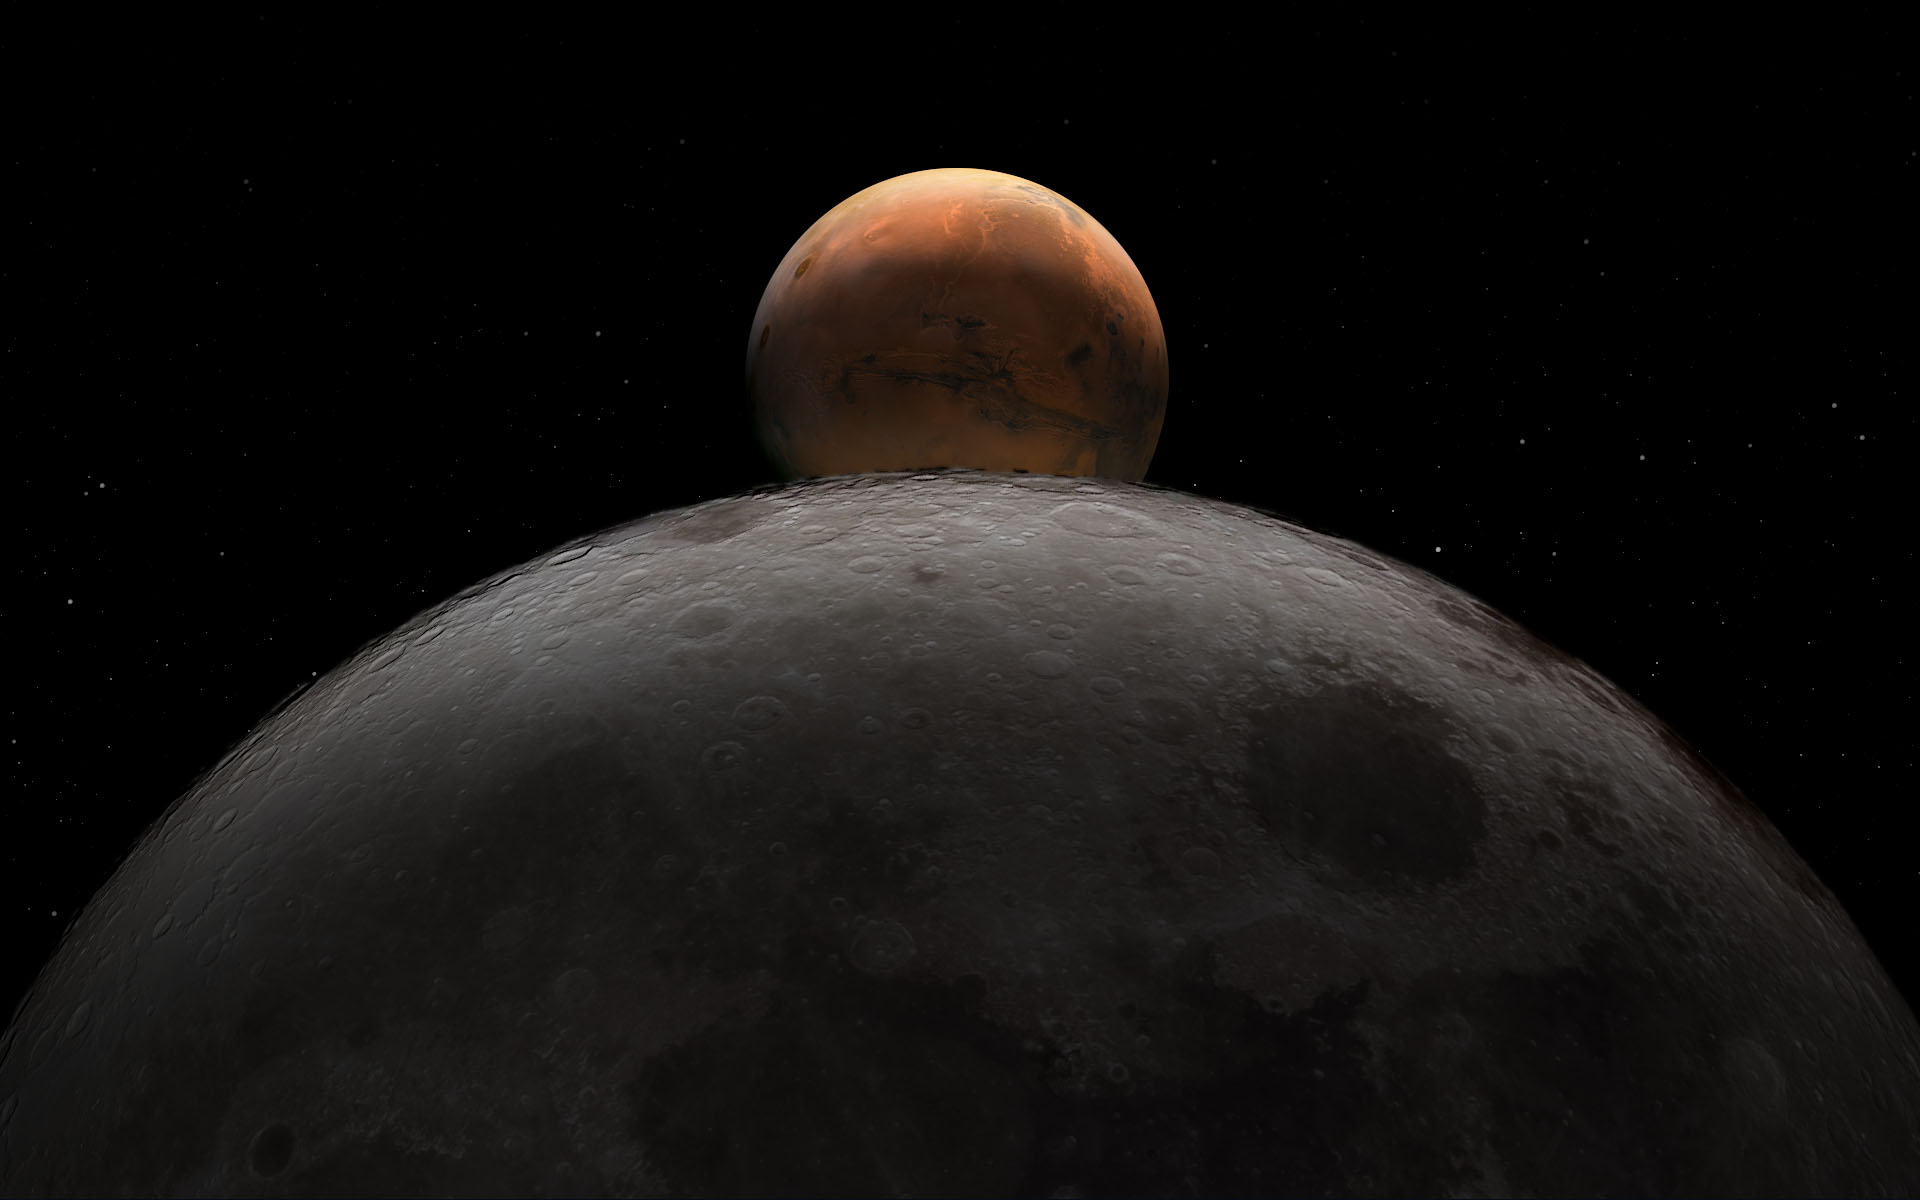 Illustration showing Moon in the foreground with Mars in the background